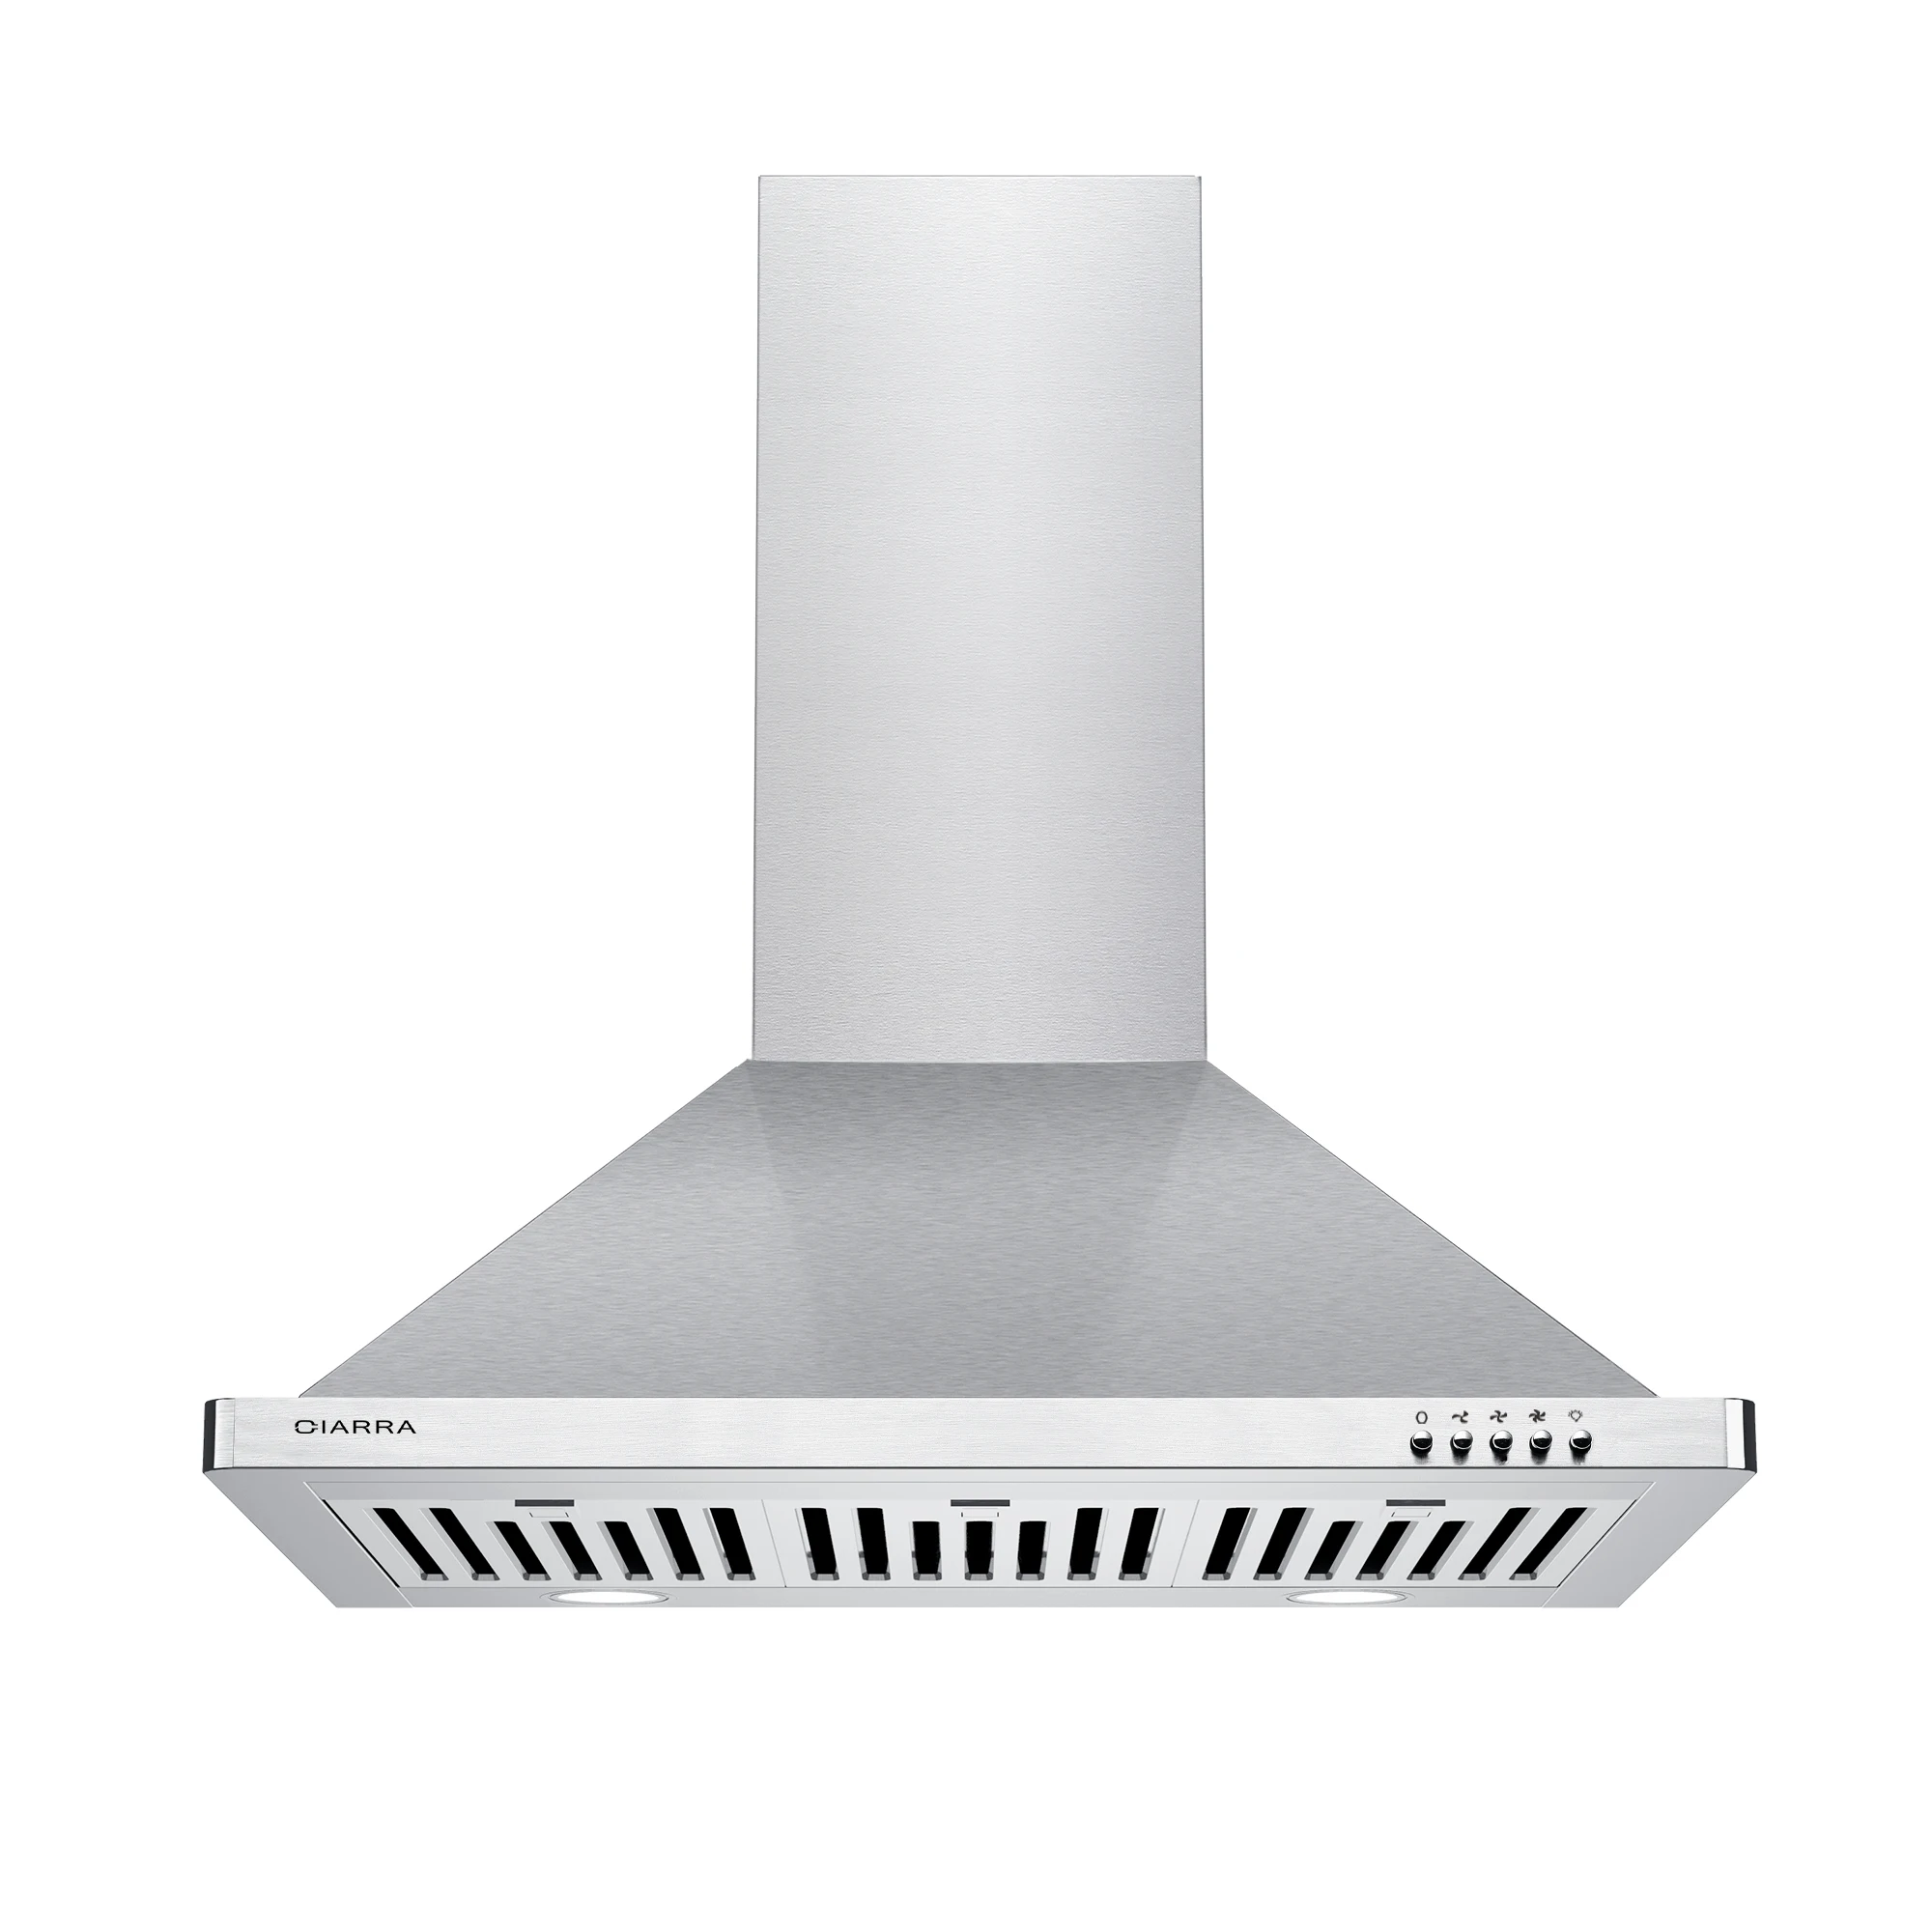 

CIARRA CAS75302 30 inch Range Hood, 450 CFM Wall Mount Stainless Steel Stove Vent with Baffle Filters, Ducted/Ductless